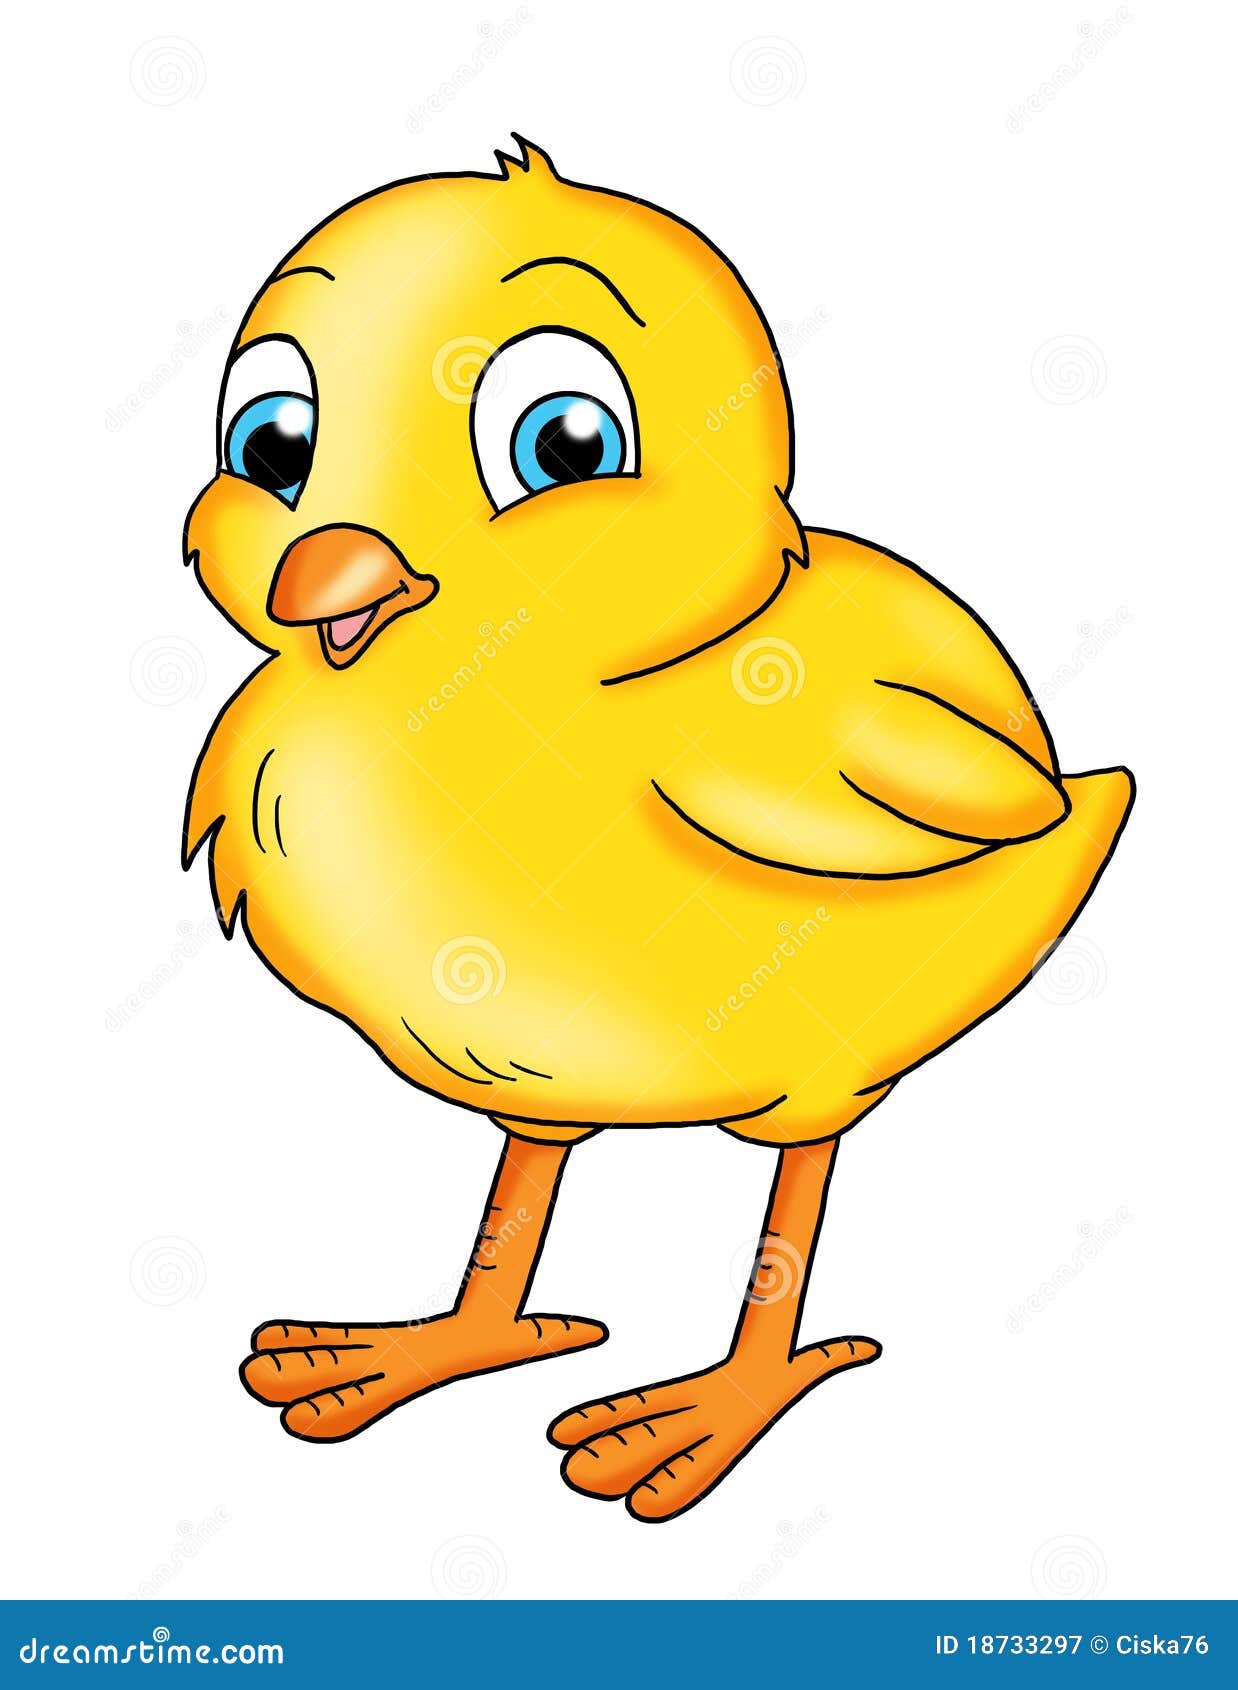 clipart of baby chicks - photo #22